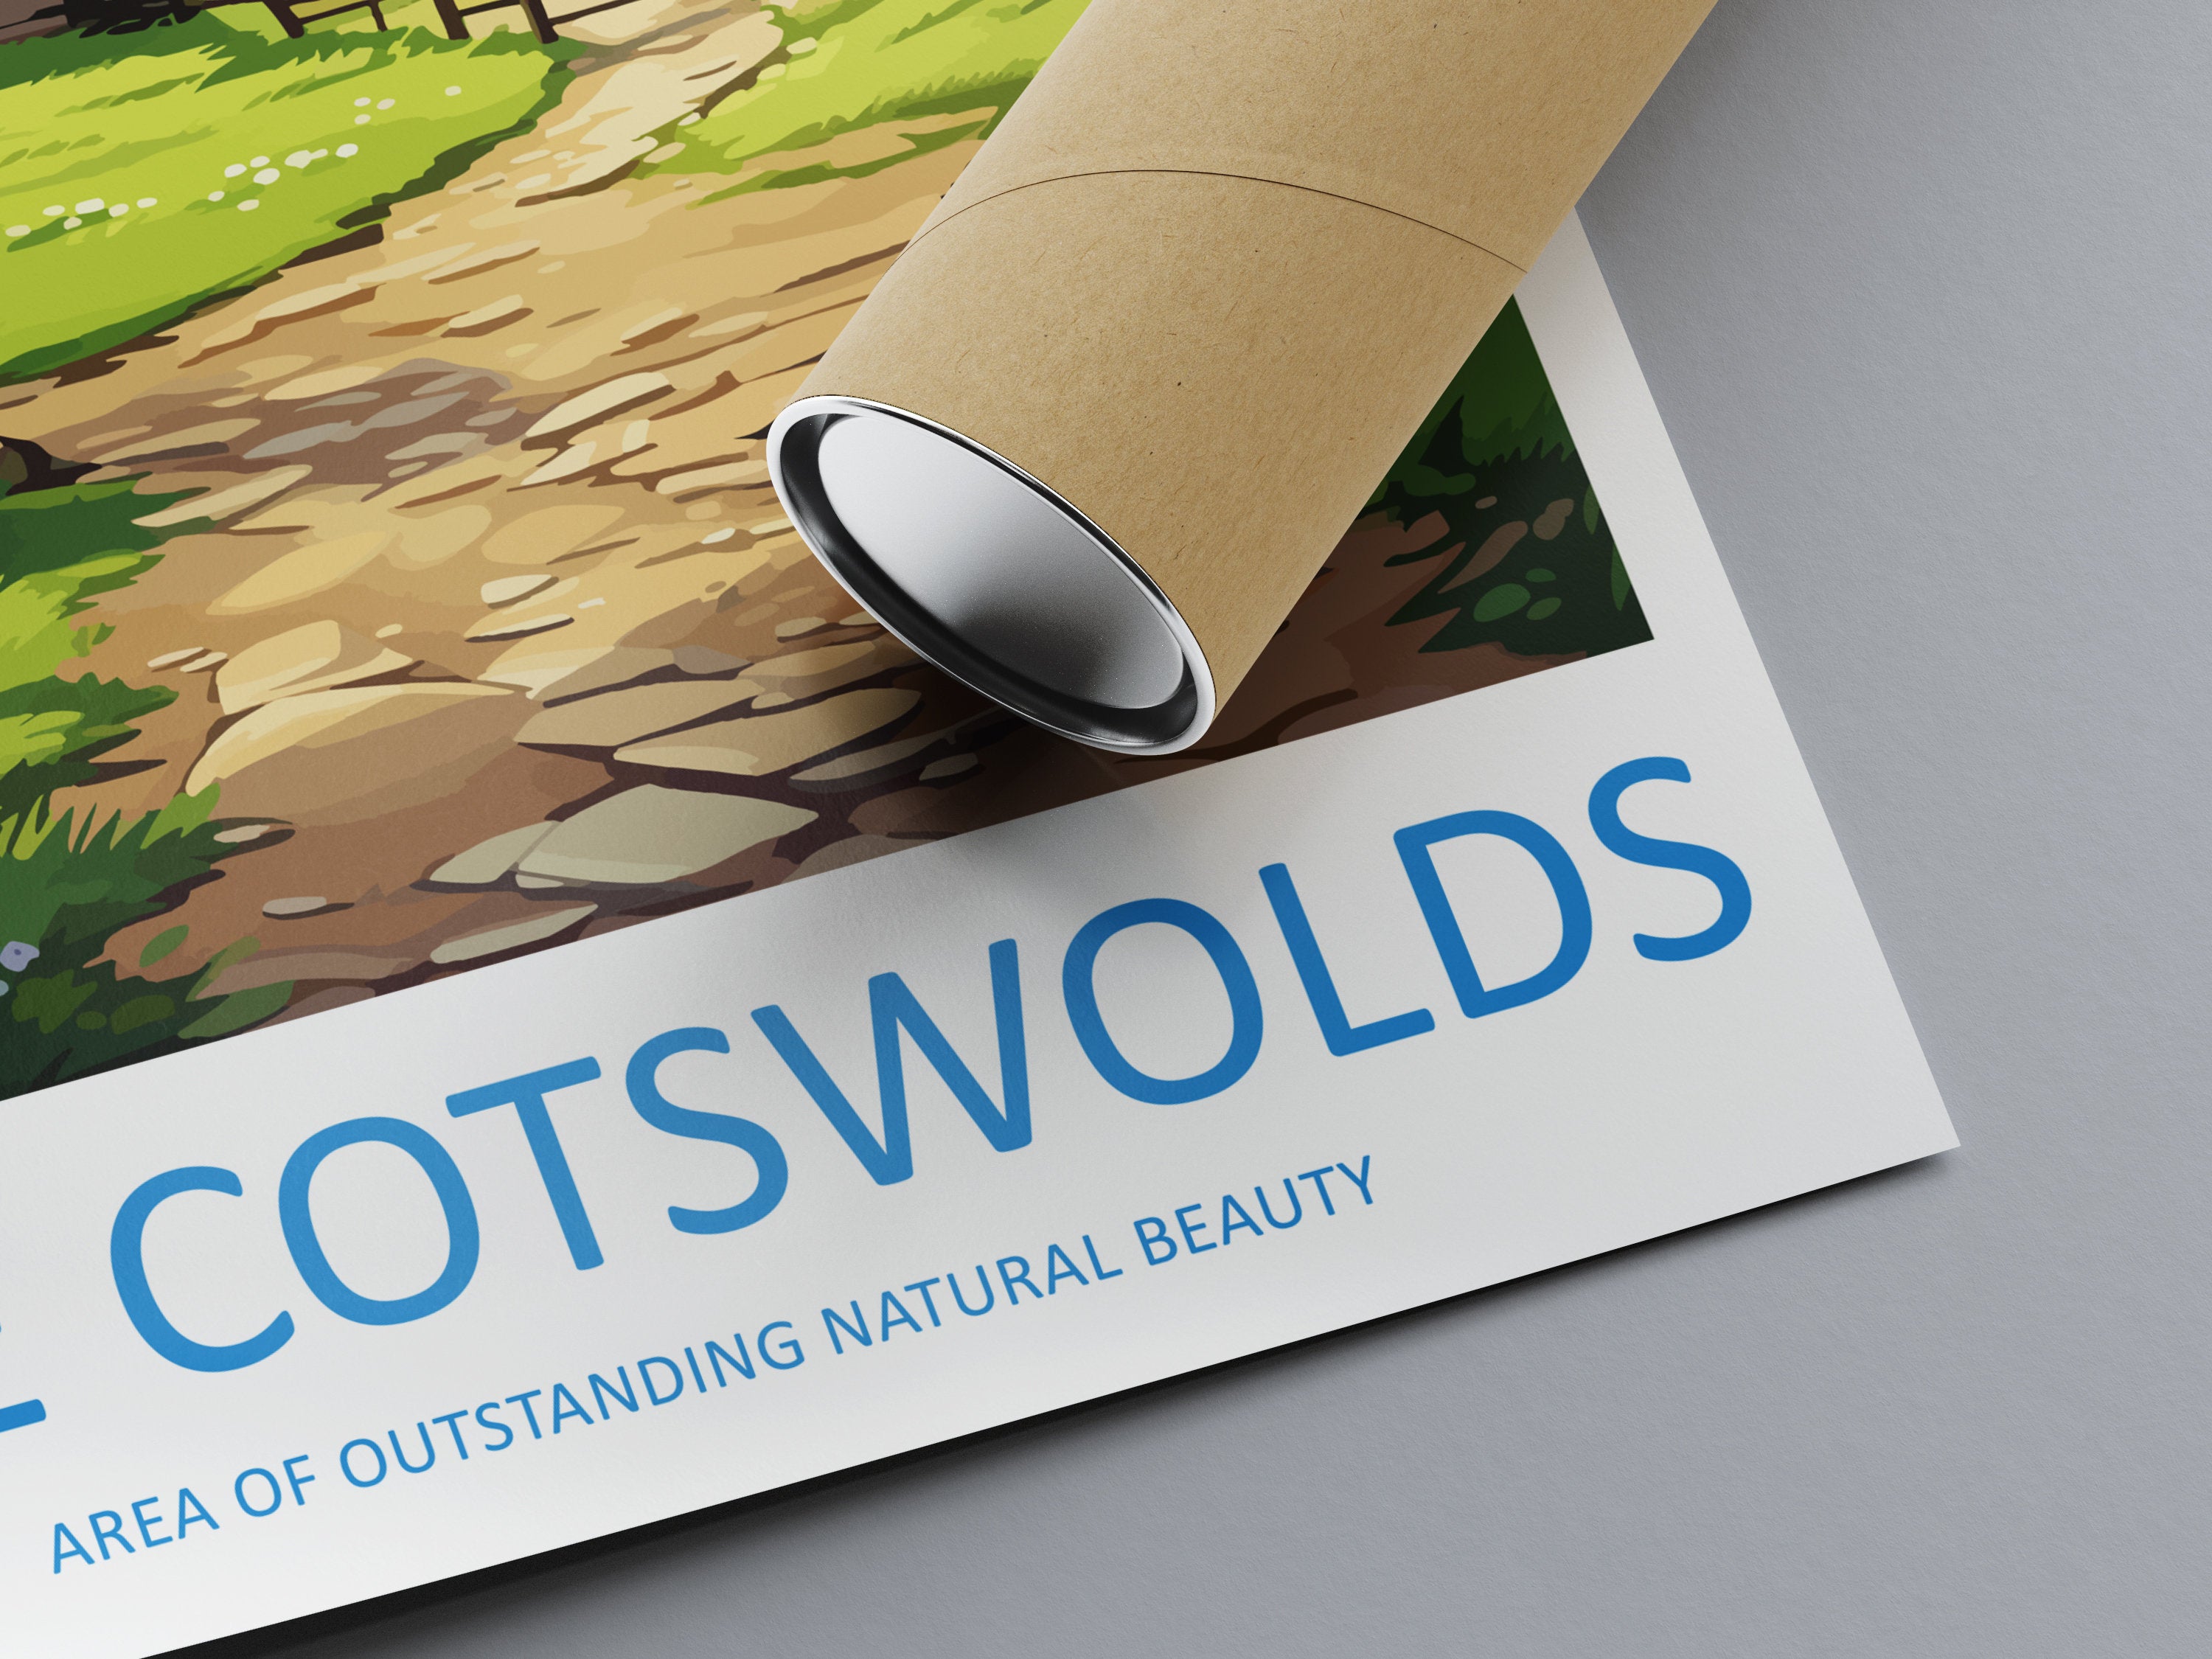 Cotswolds Travel Print Wall Art Cotswolds Wall Hanging Home Decor Cotswolds Gift Art Lovers Wall Art AONB Print